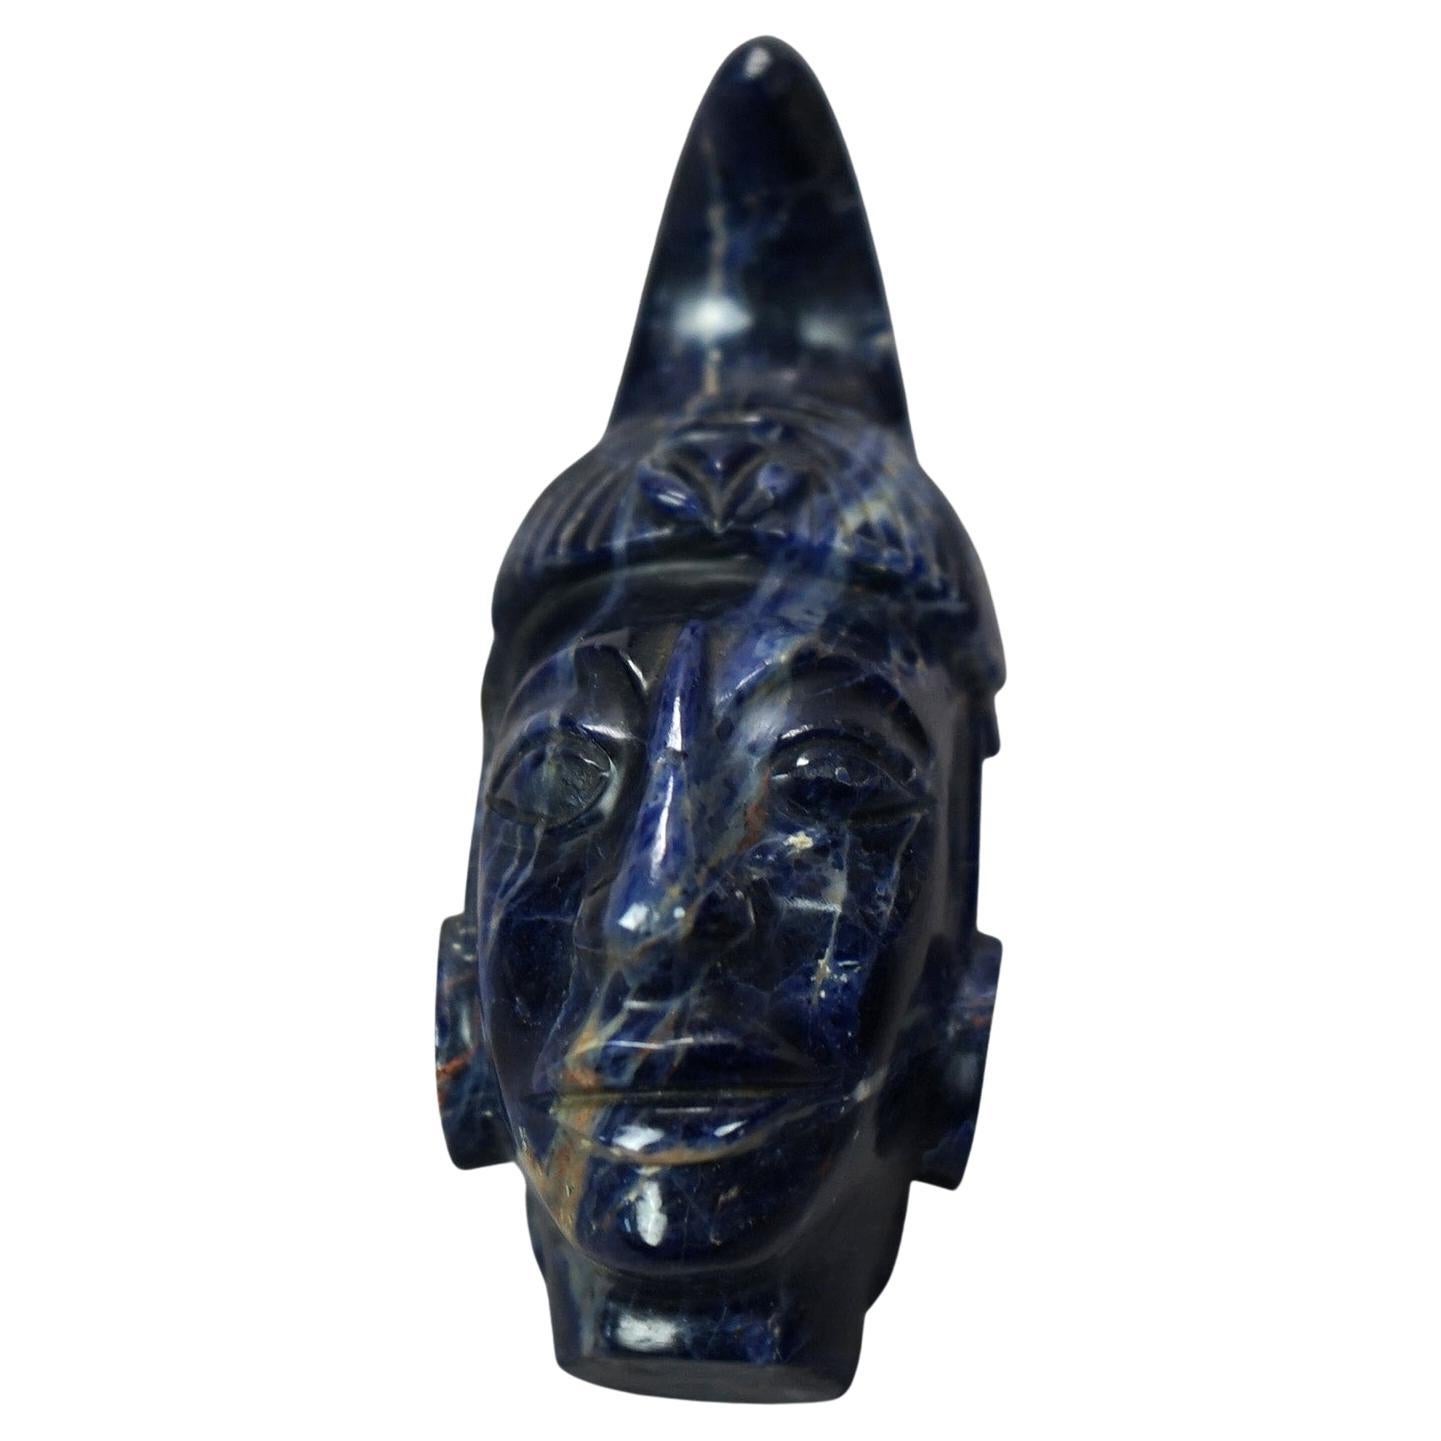 A portrait bust offers carved carved lapis lazuli Indian head, 20th century

Measures - 4.25